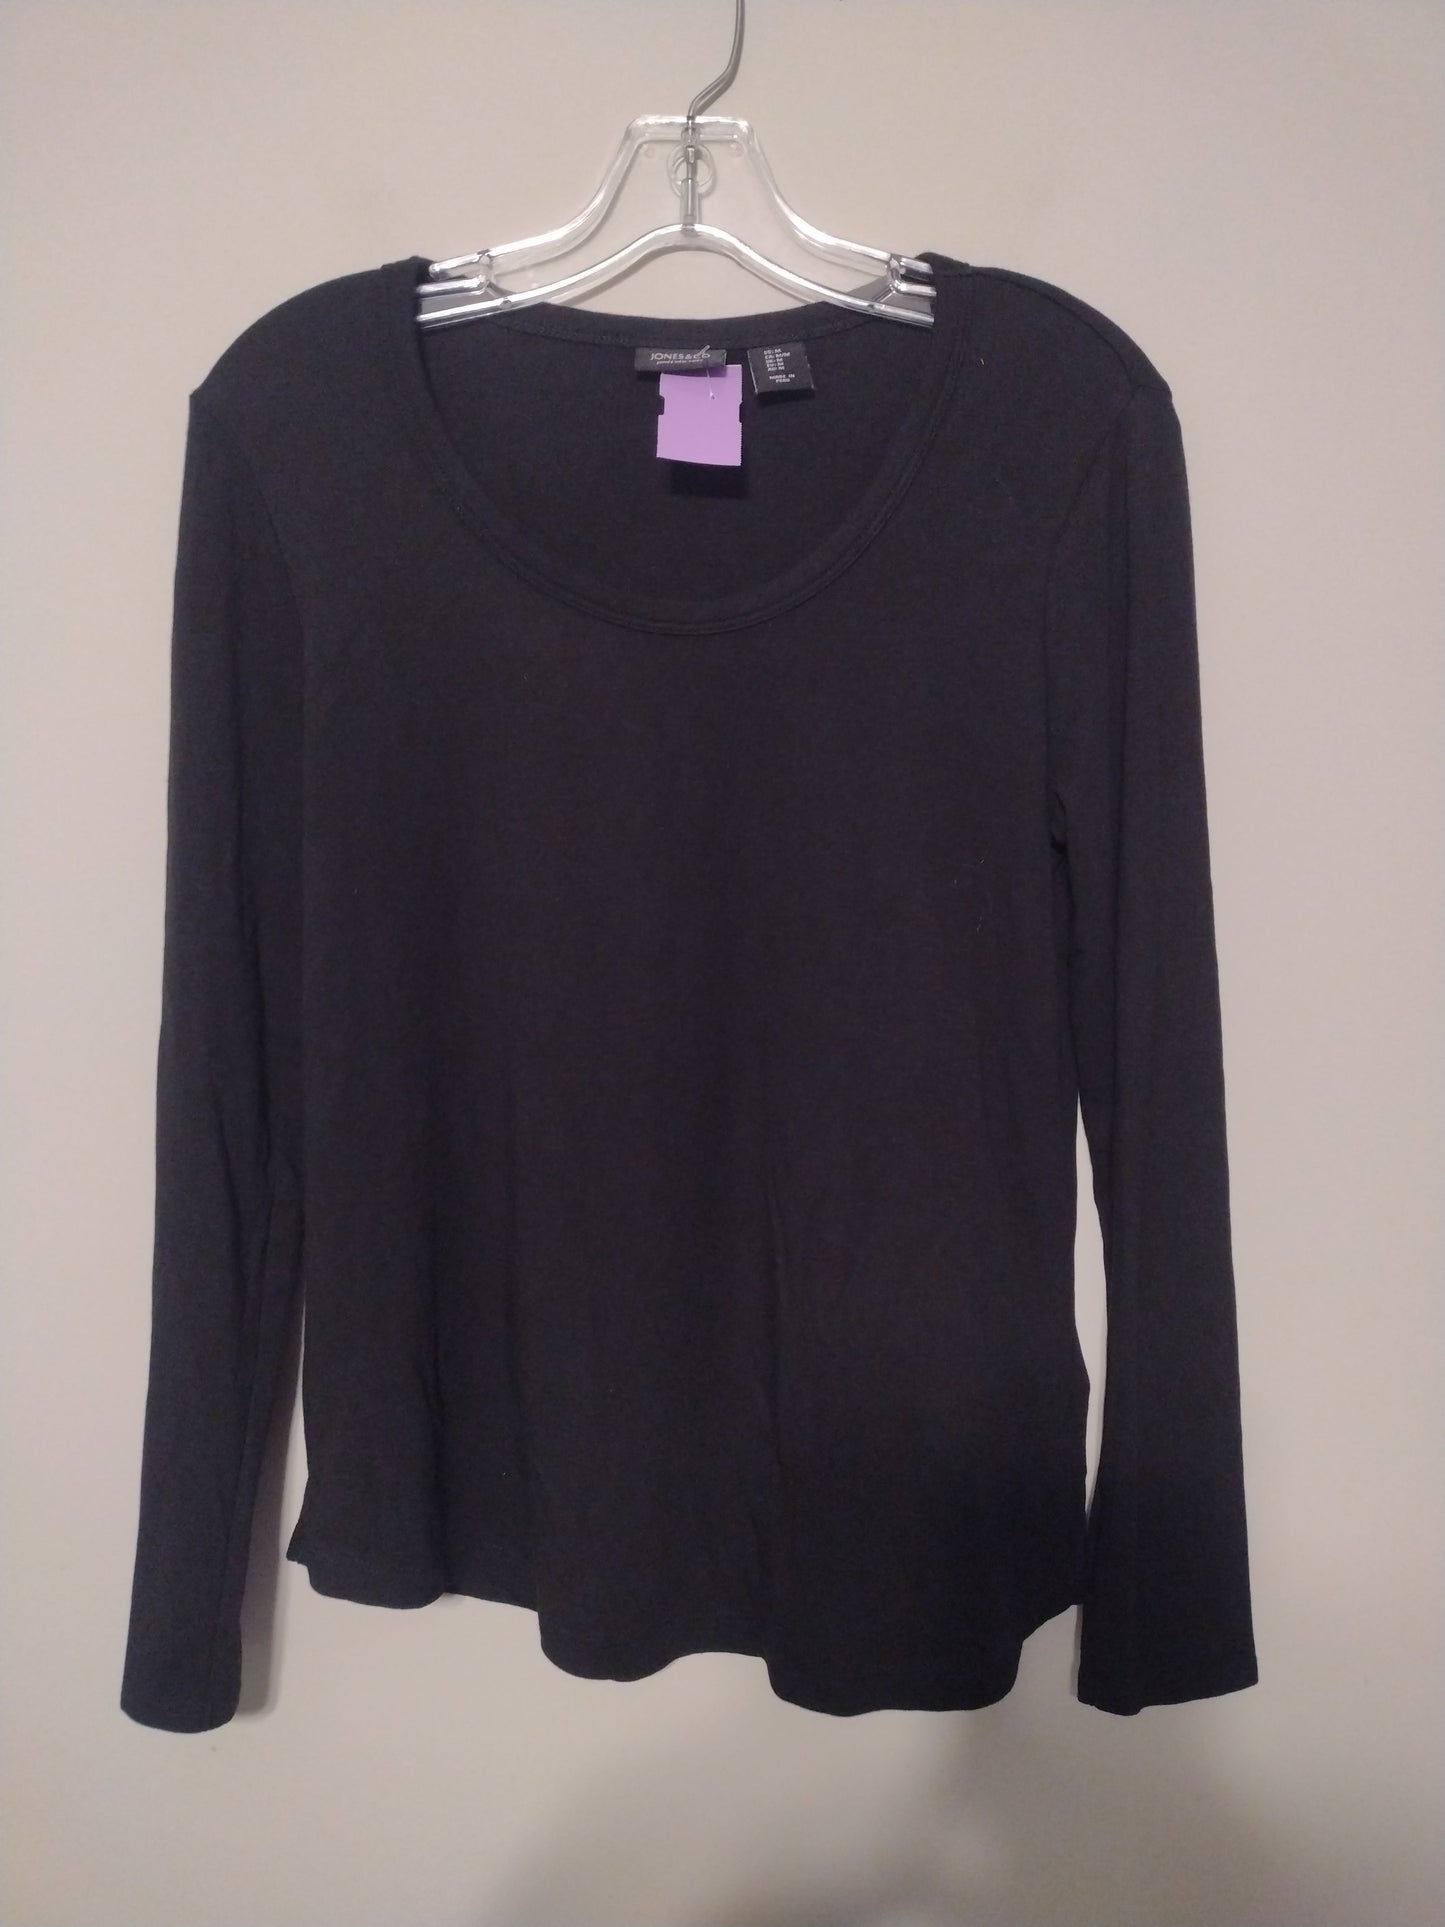 Top Long Sleeve By Jones And Co  Size: M